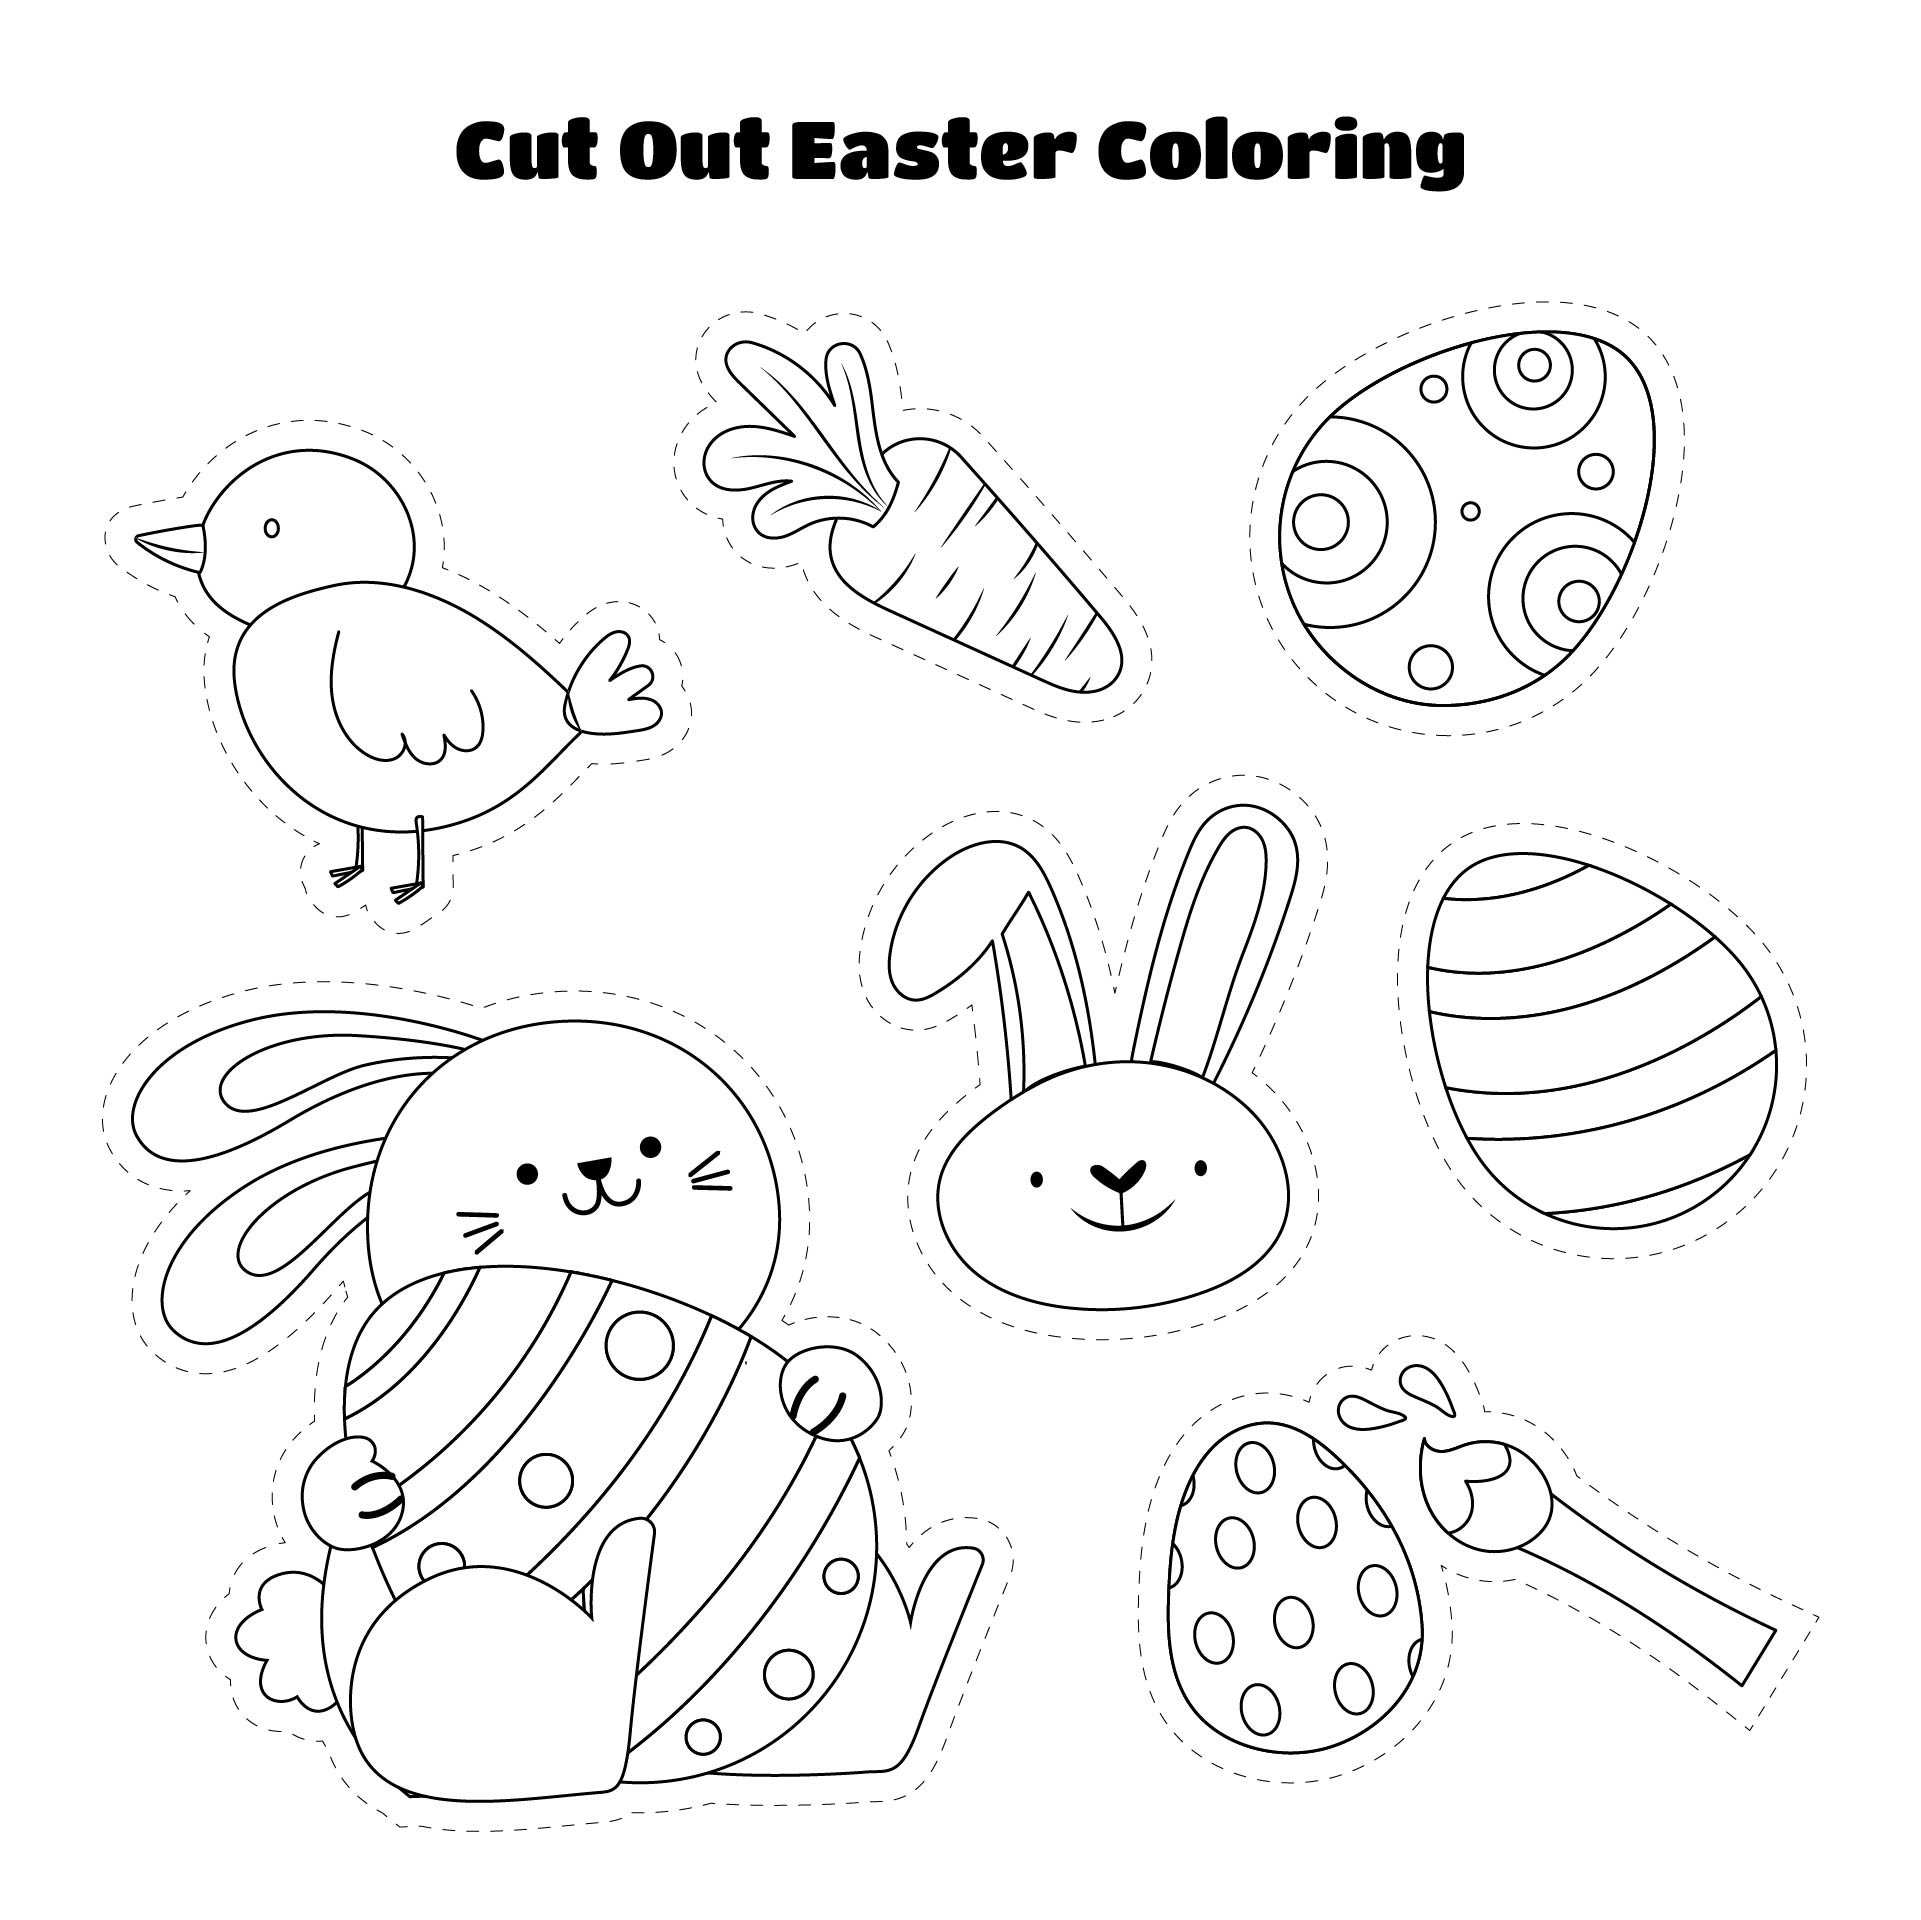 Cut Out Easter Coloring Pages